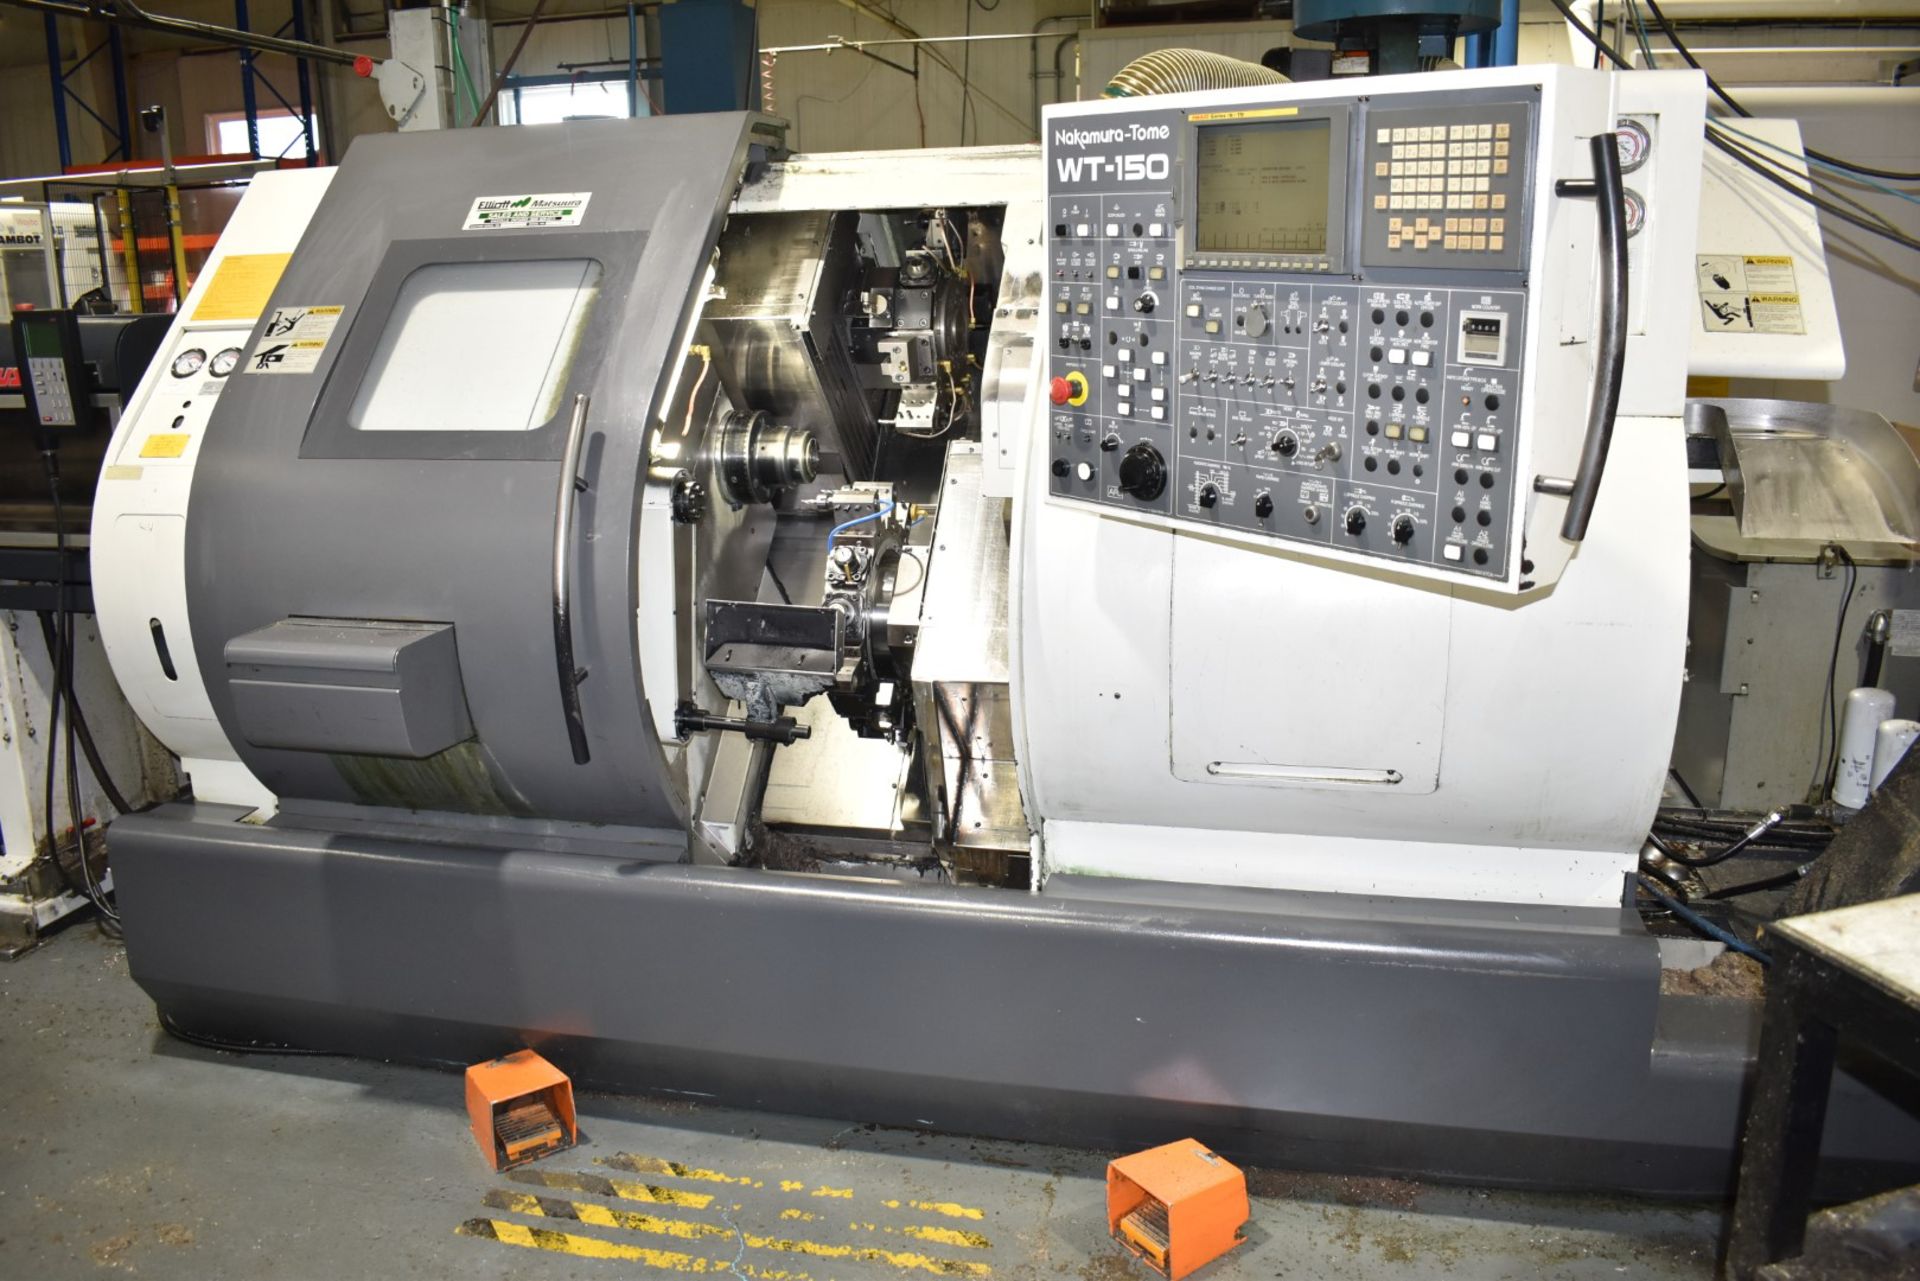 NAKAMURA-TOME (2006) WT-150 MMYS MULTI-AXIS OPPOSED SPINDLE AND TWIN TURRET CNC MULTI-TASKING CENTER